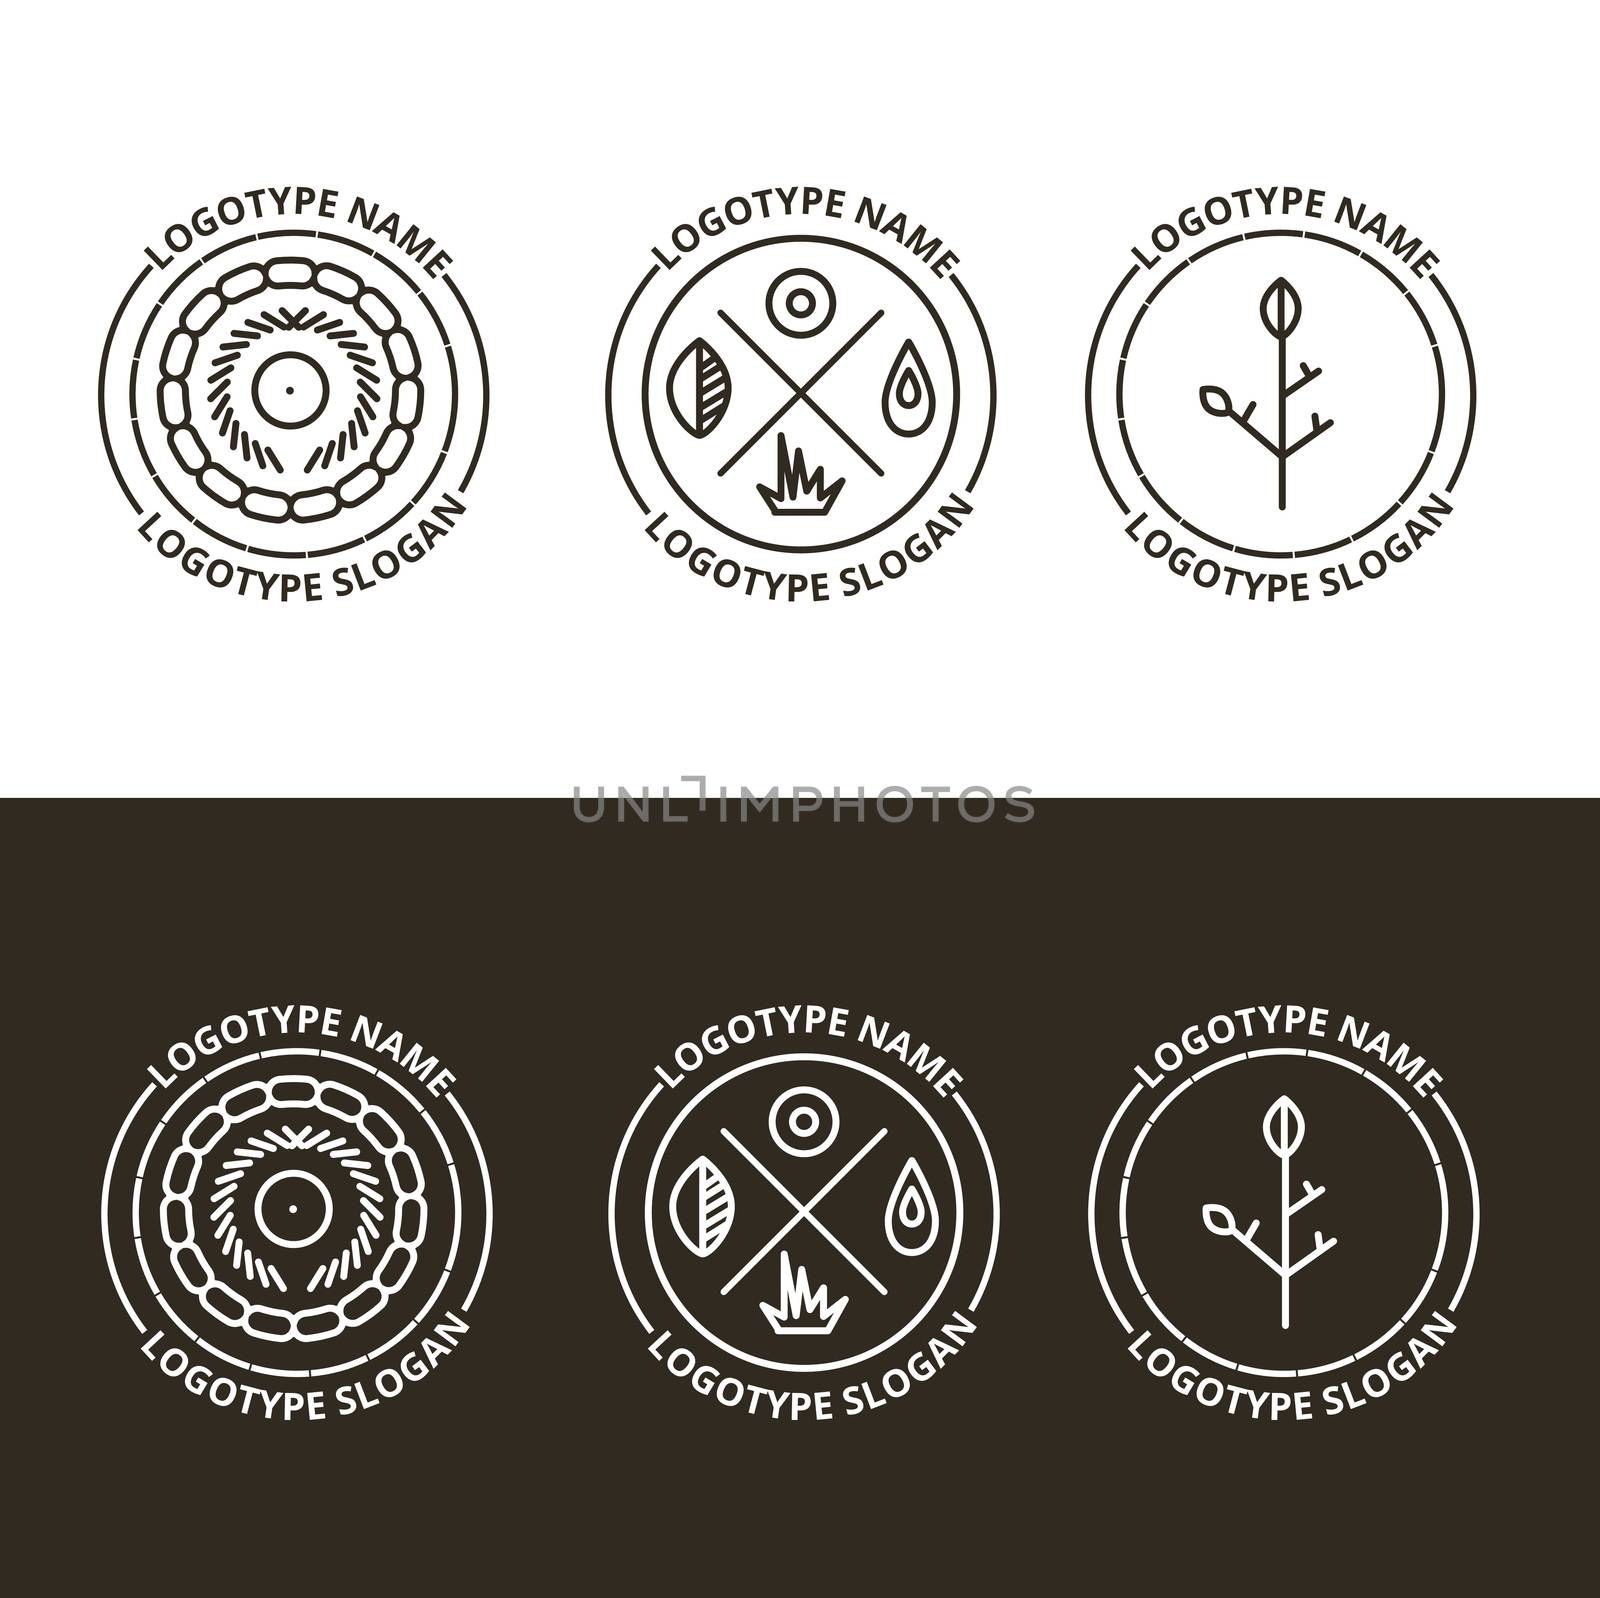 Vector set of nature and travelling logo in eps